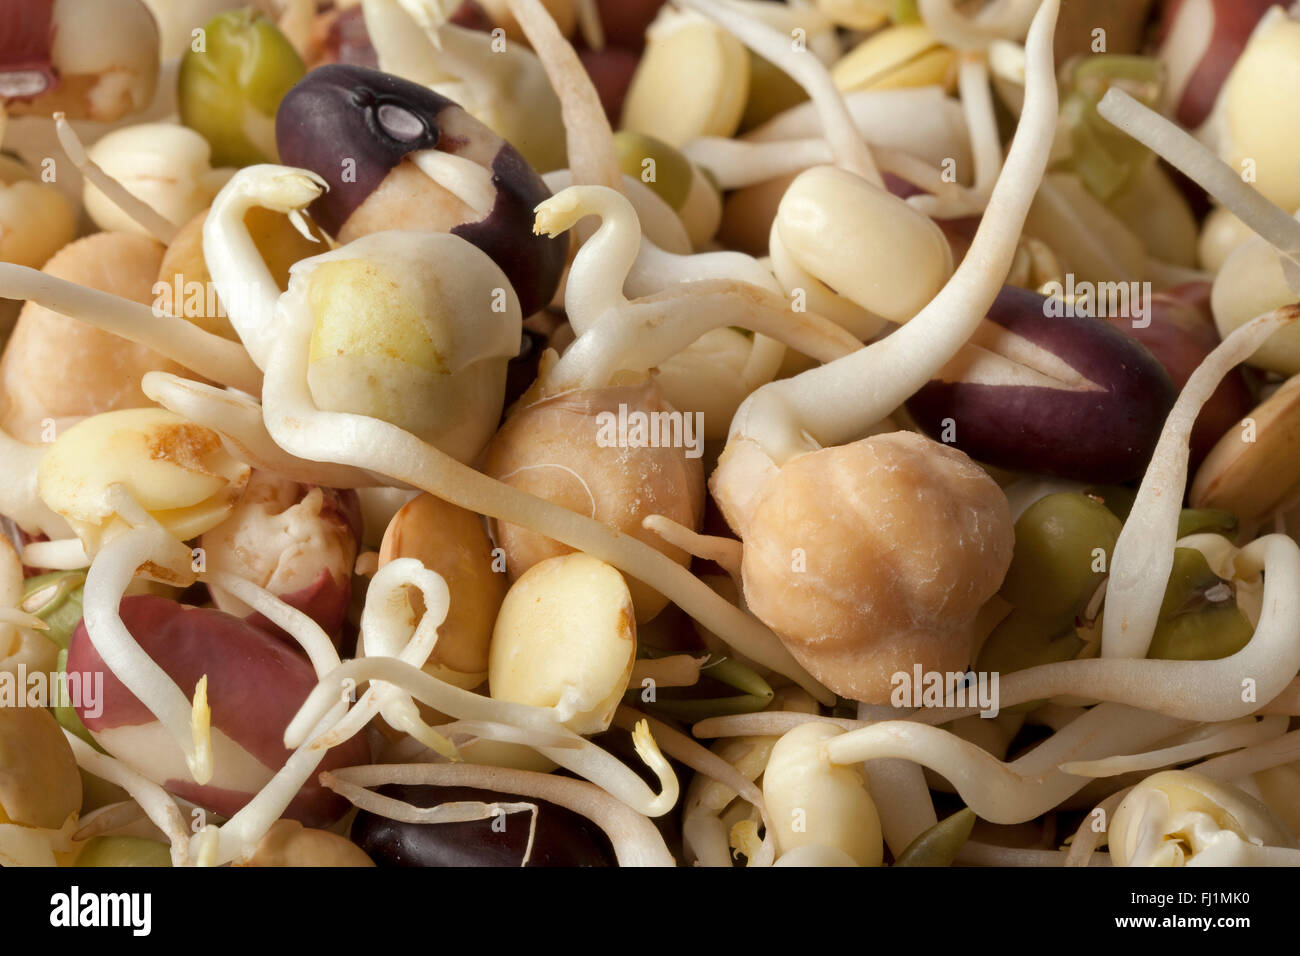 Fresh raw different sprouts close up full frame Stock Photo